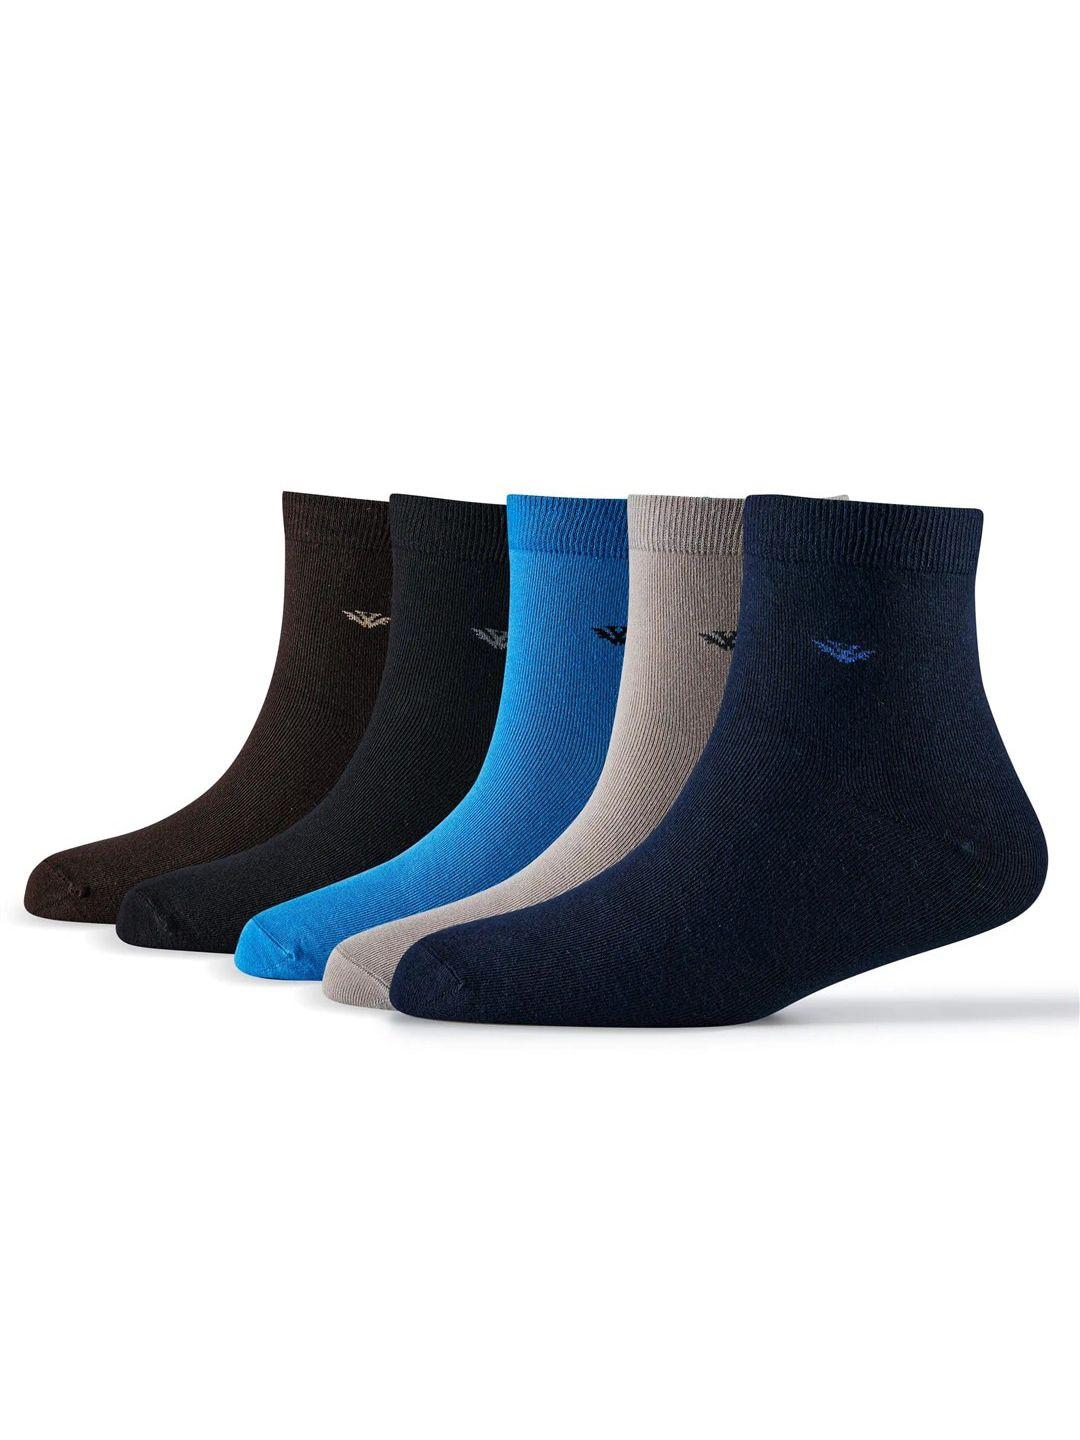 cotstyle men pack of 5 ankle-length socks